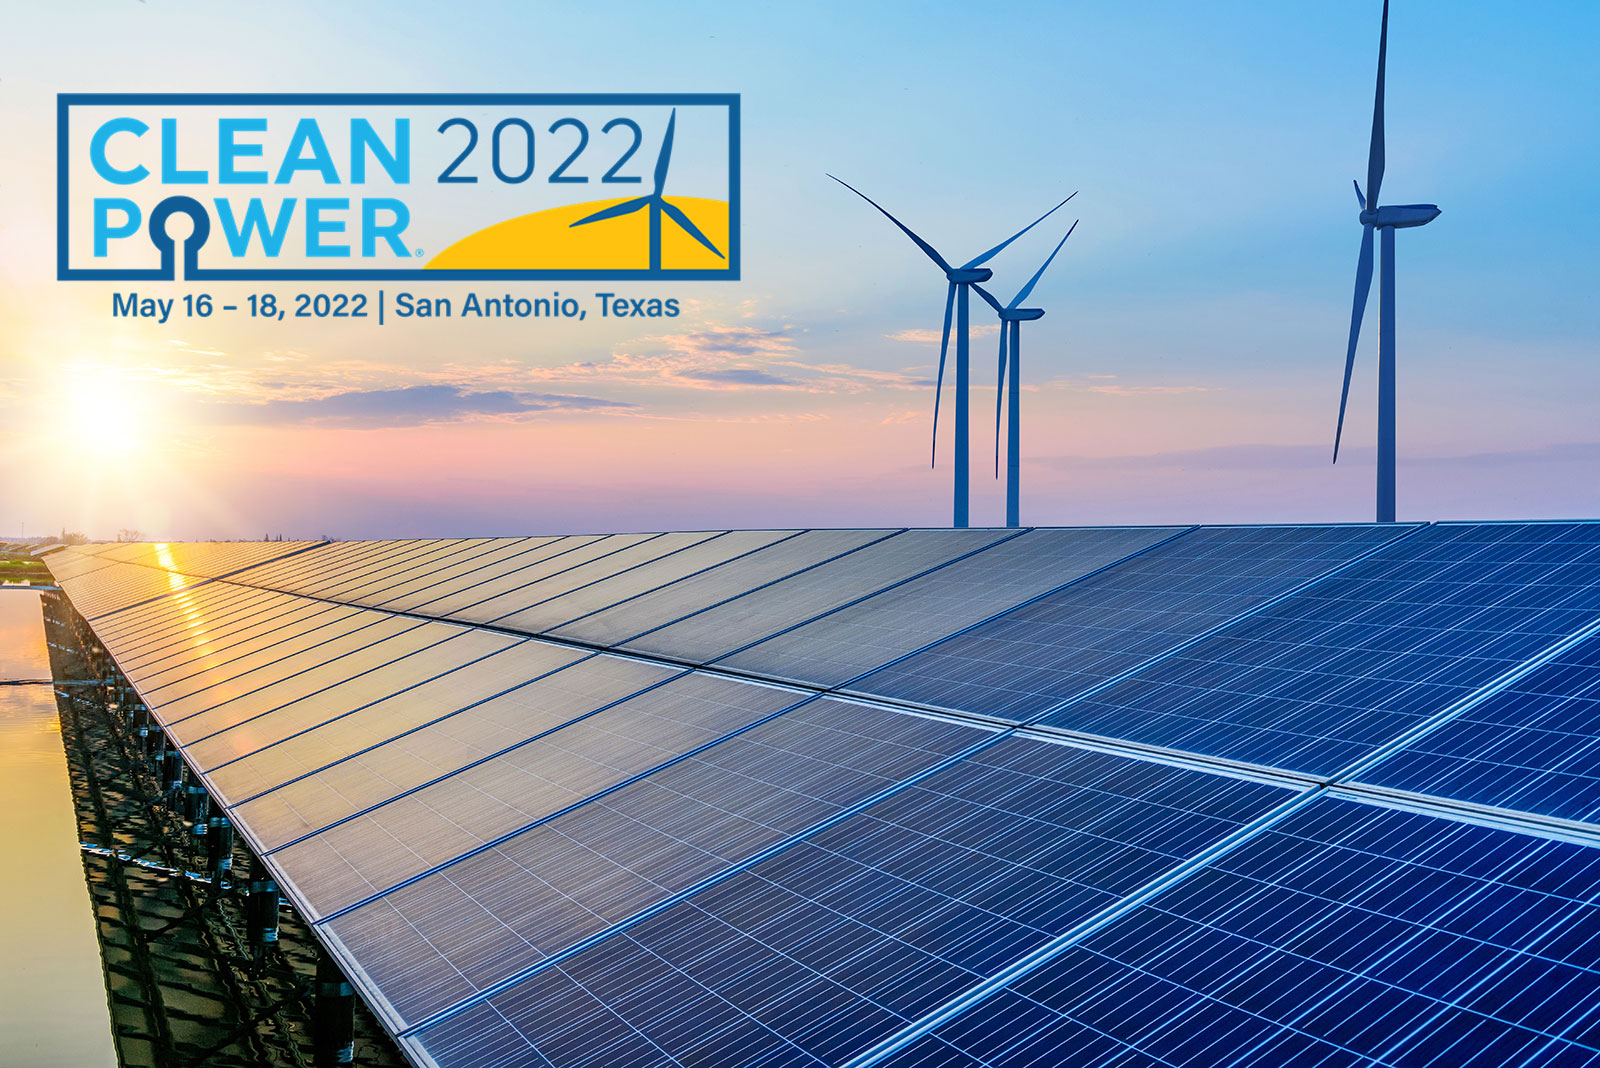 Skeleton’s Wind and Grid Industry Solutions on Show at Cleanpower 2022